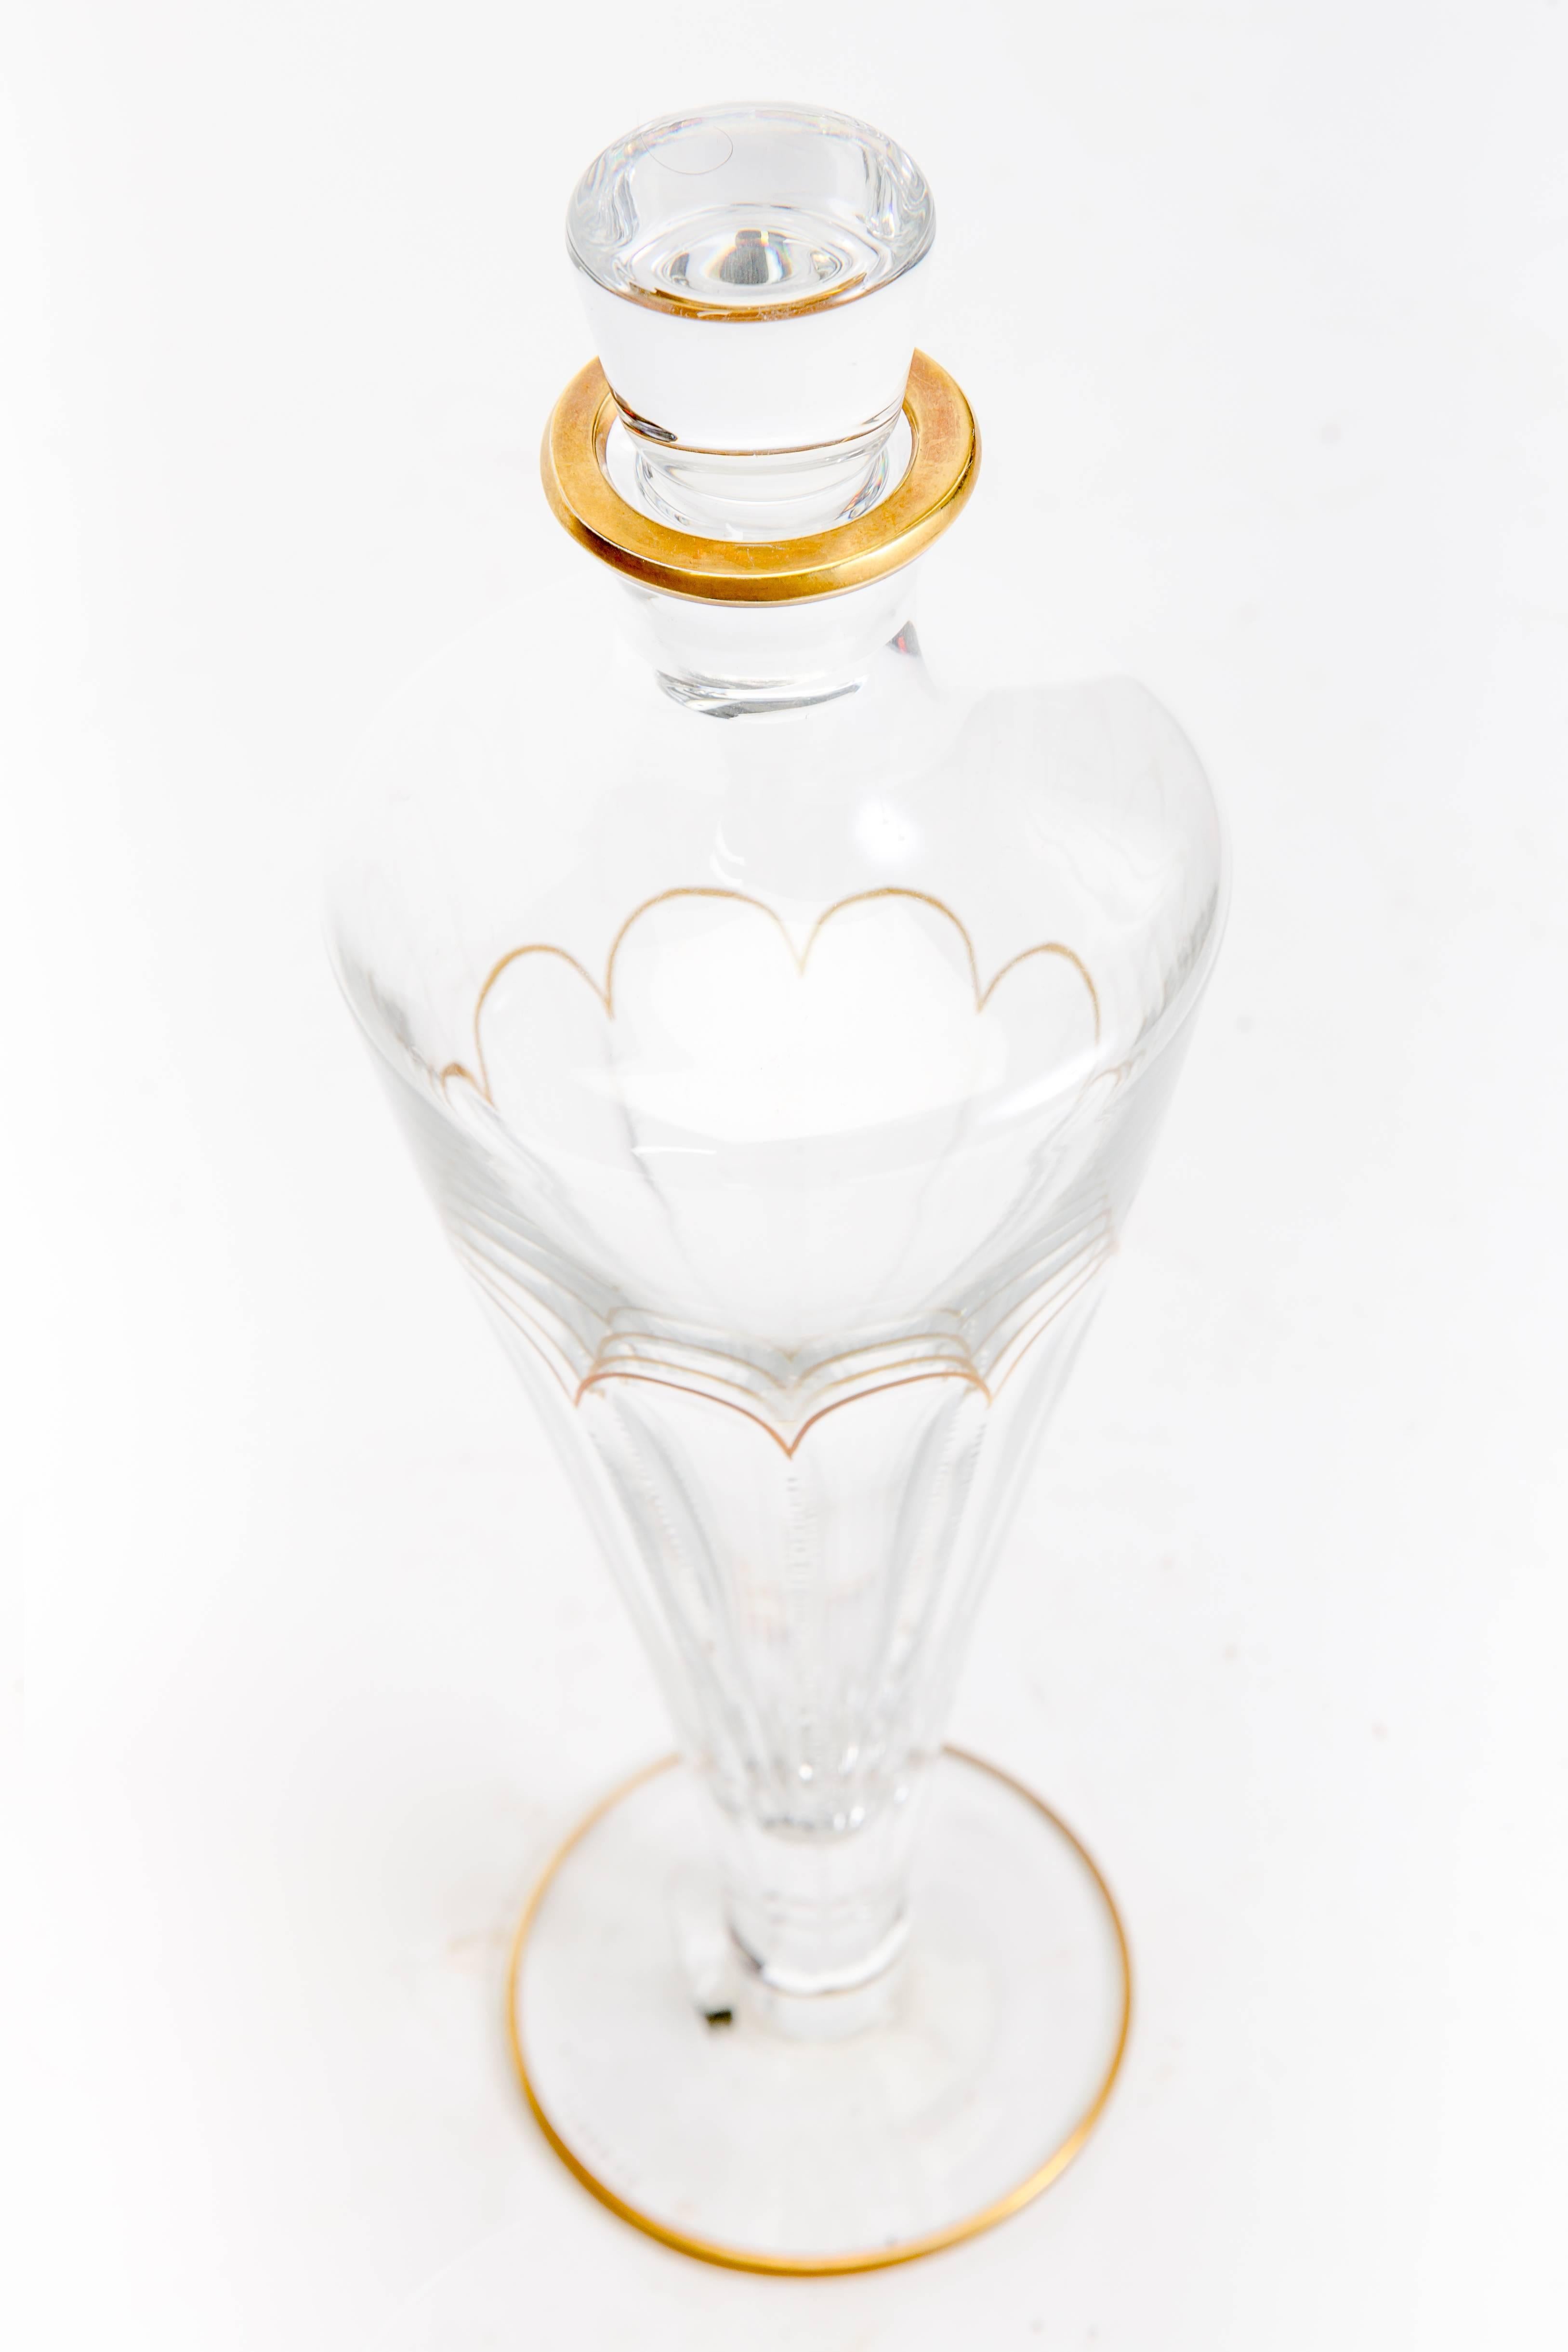 Authentic Faberge crystal France operetta decanter with stopper. Gold trim. Signed item.